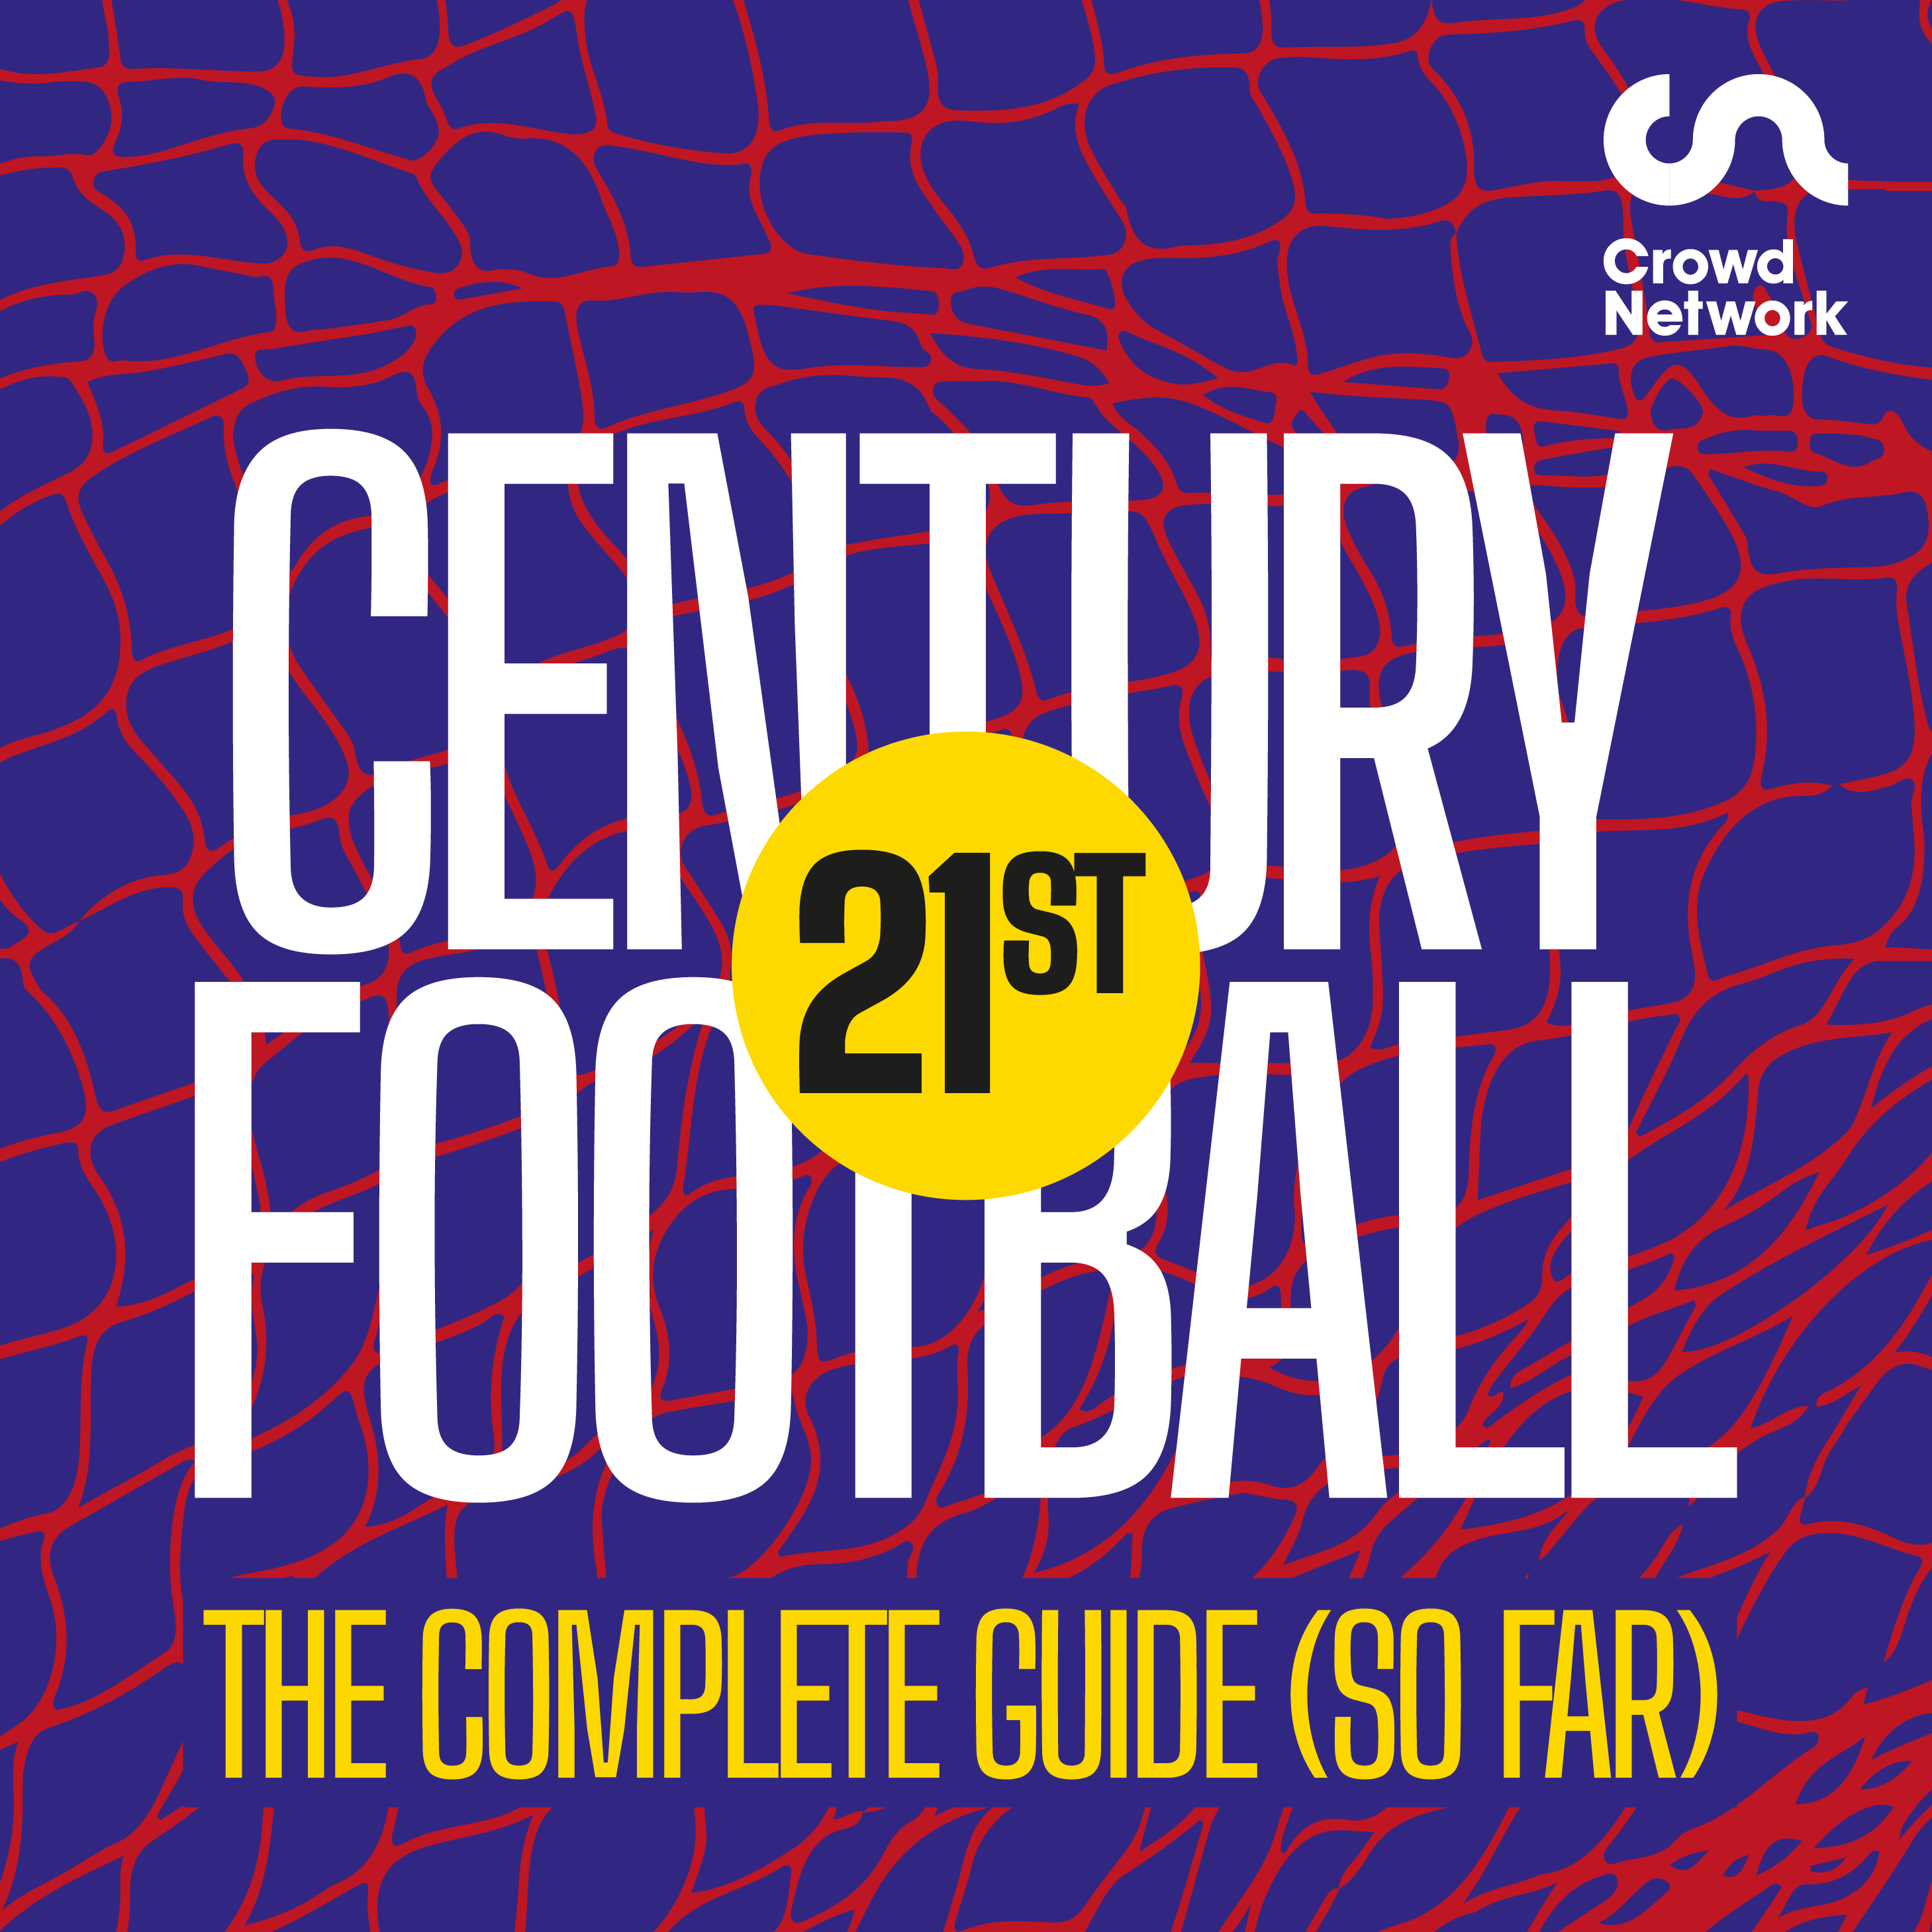 21st Century Football: The Complete Guide (So Far)